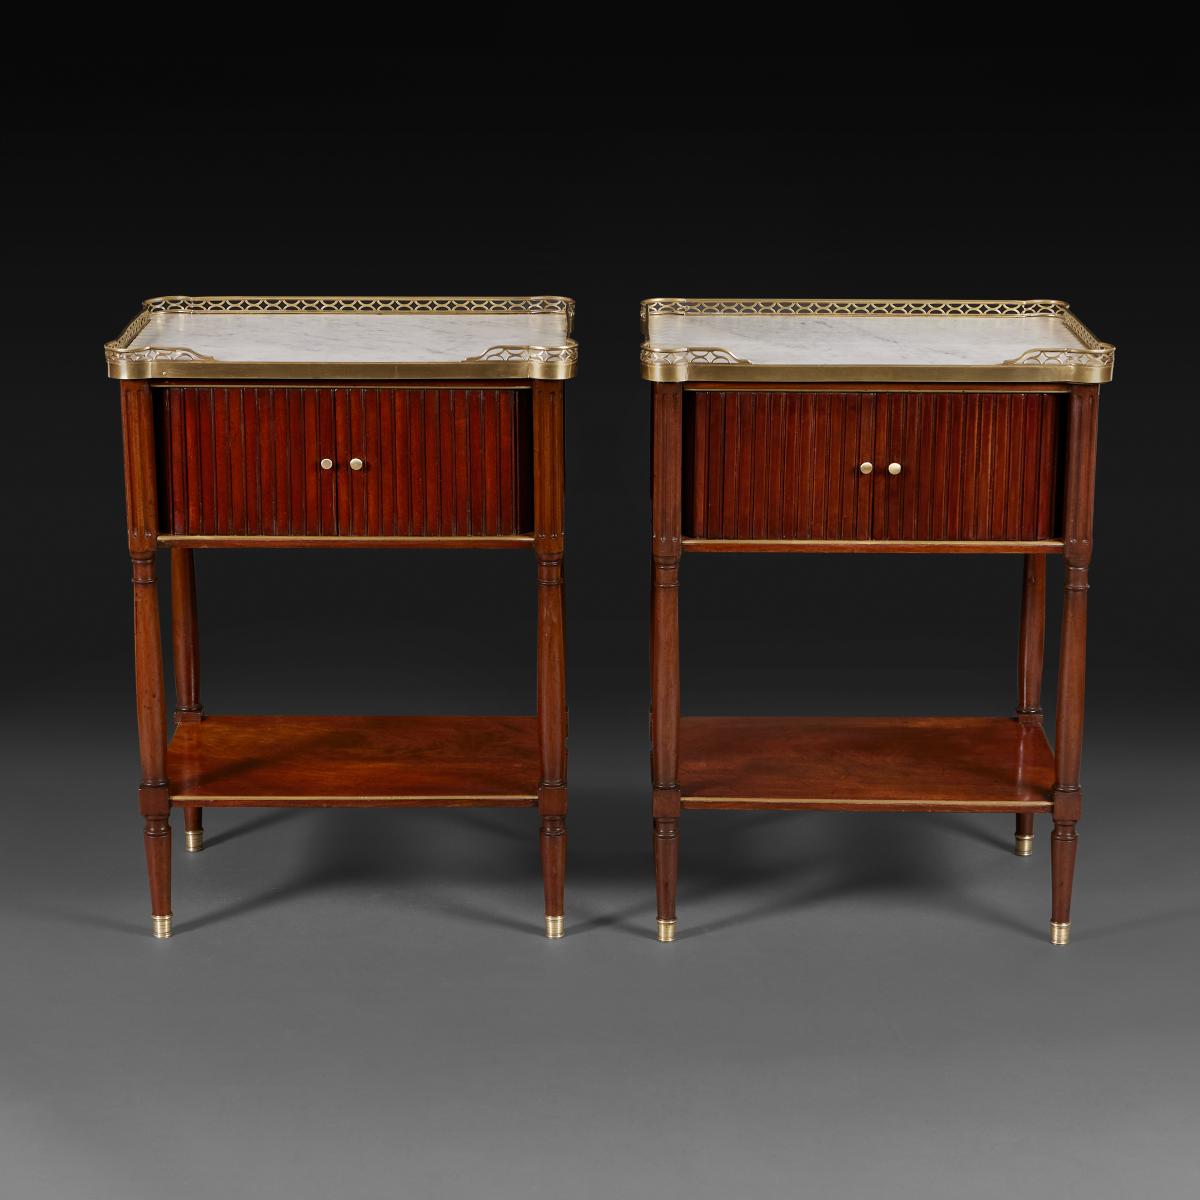 A Fine Pair of Tambour Front Bedside Tables